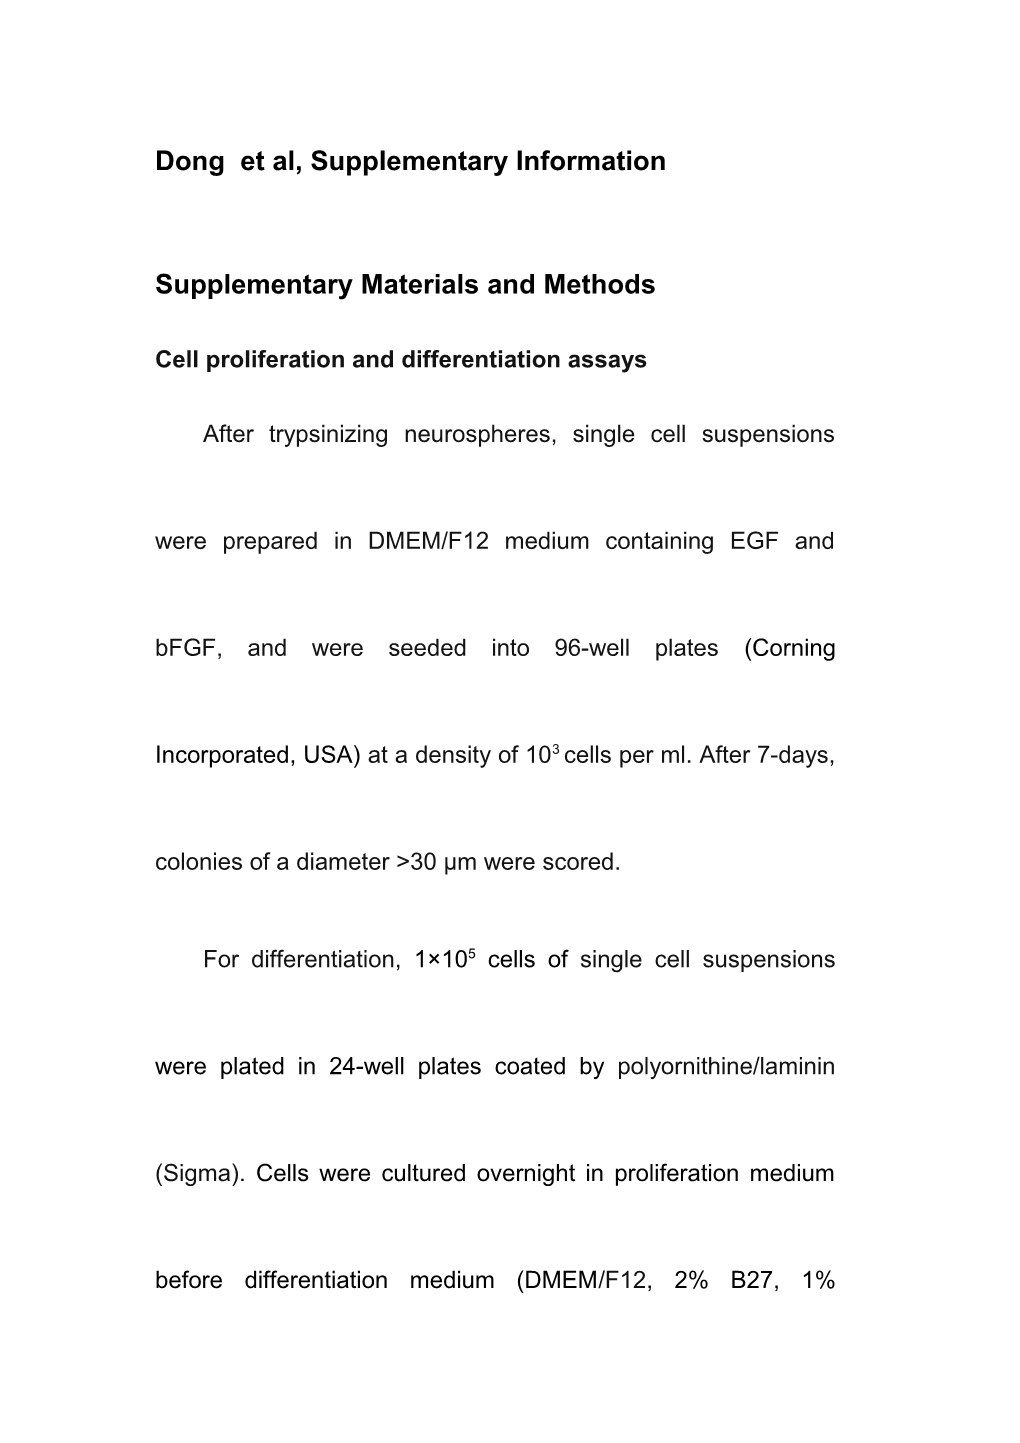 Supplementary Materials and Methods s18